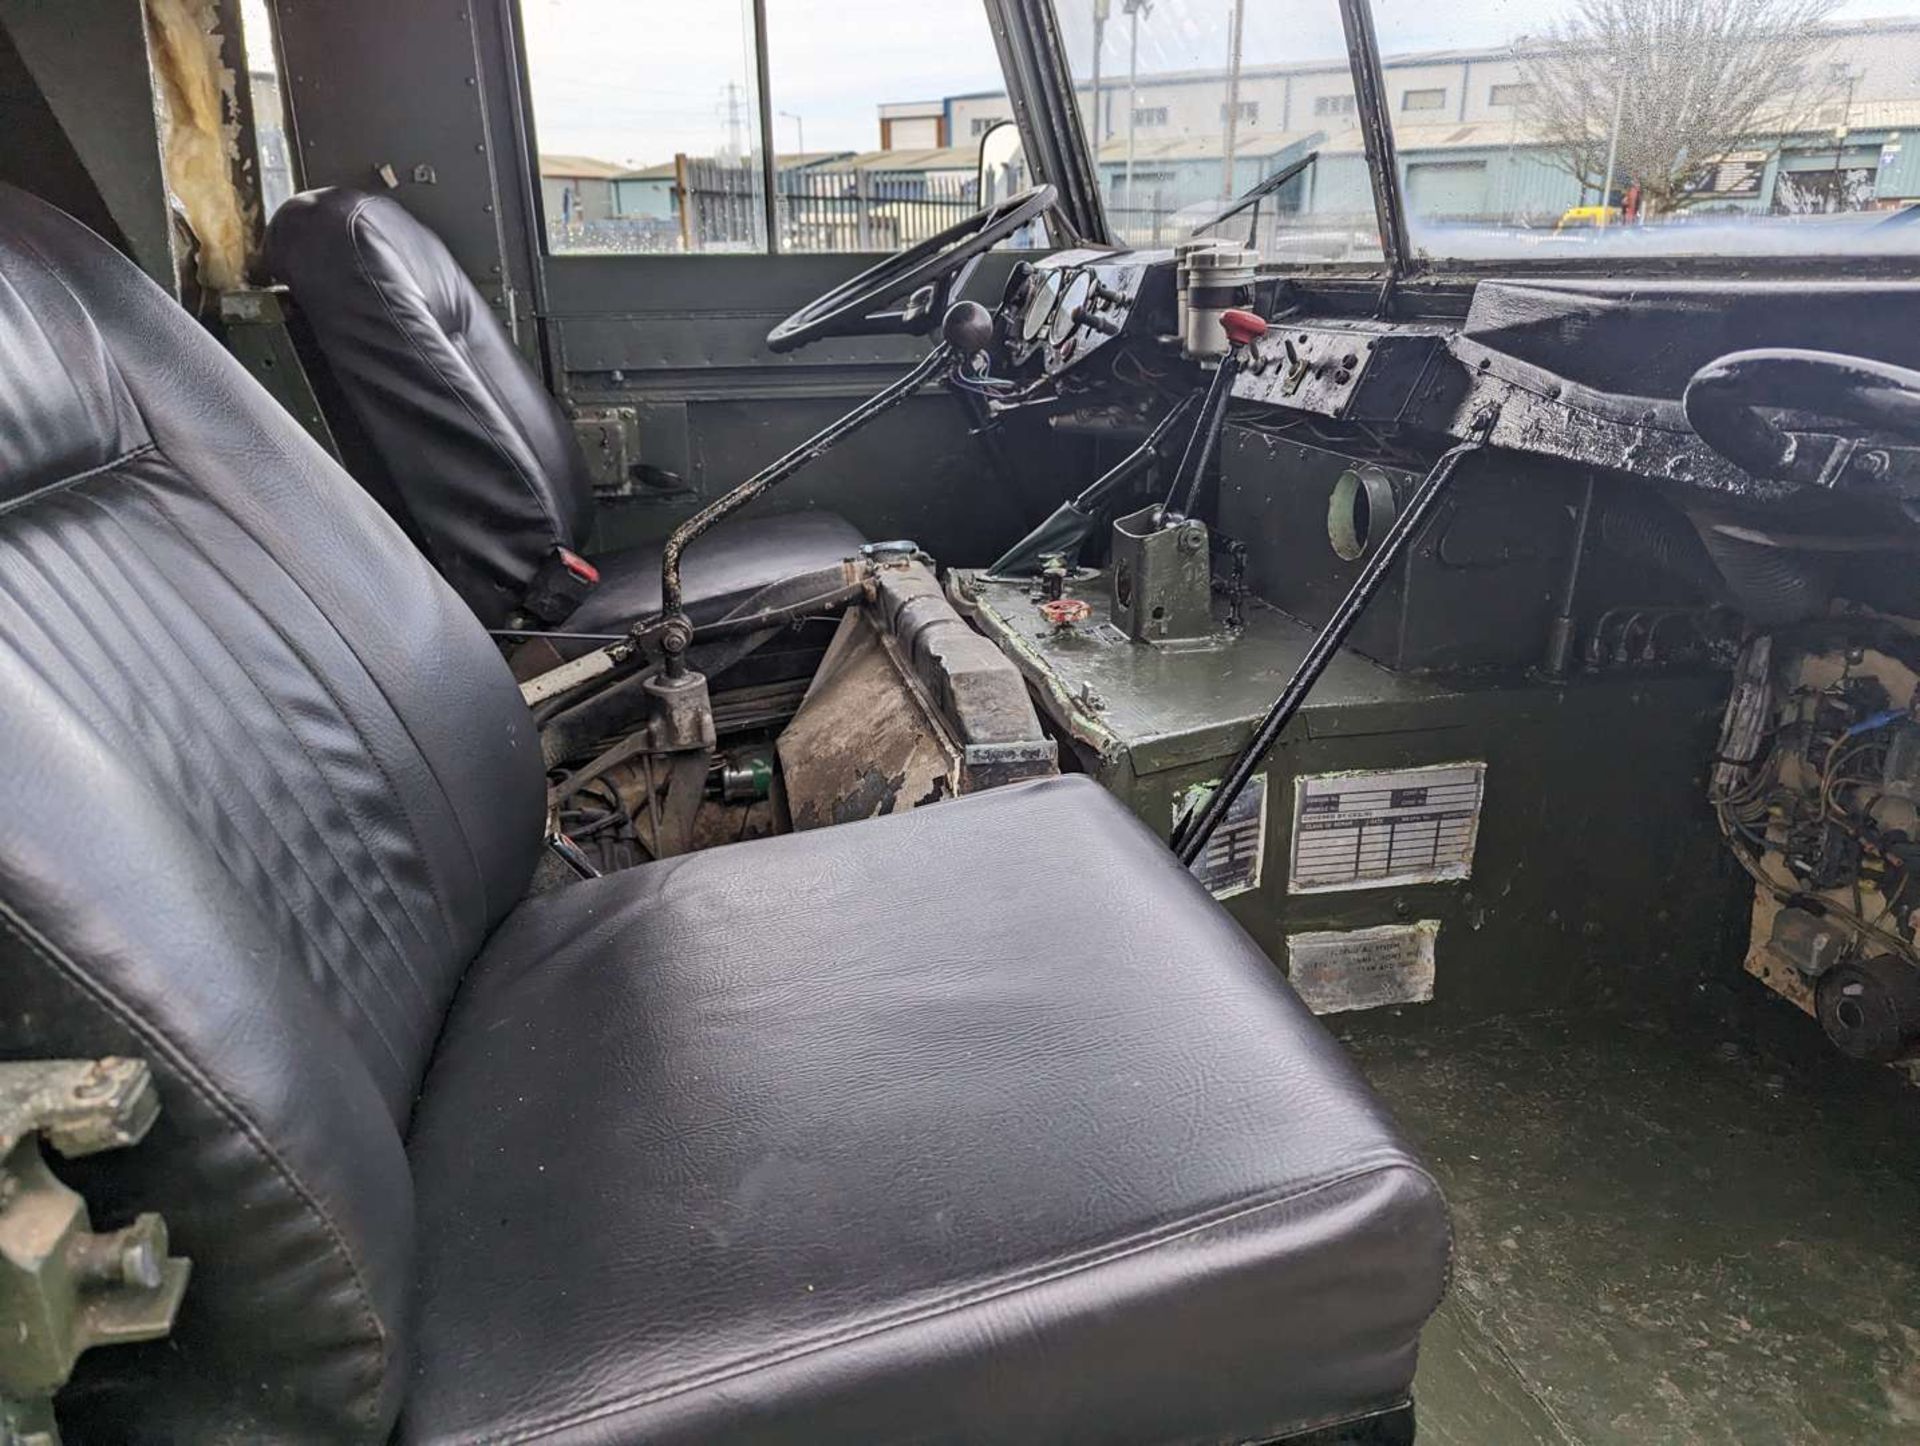 1977 LAND ROVER FORWARD CONTROL FC101 LHD - Image 12 of 25